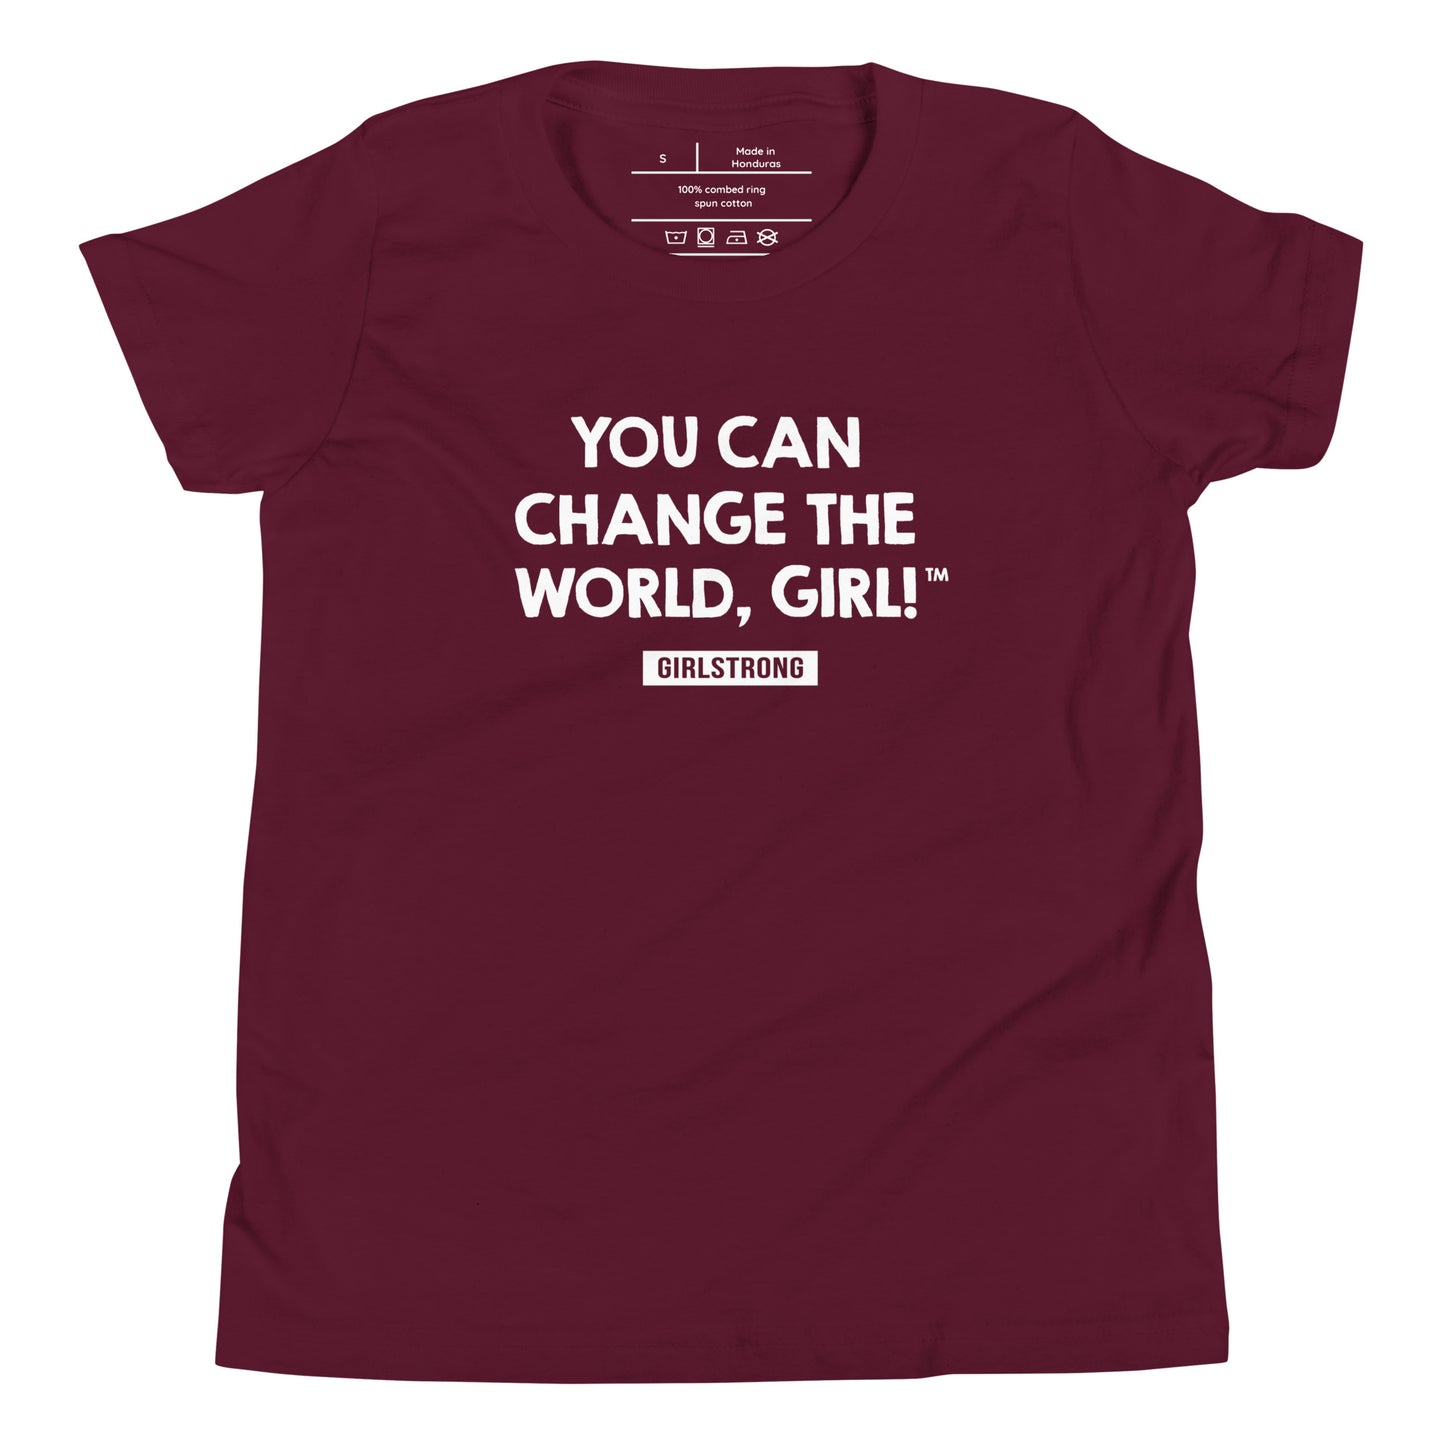 FAVORITE PRINCESS MAROON TEE - YOU CAN CHANGE THE WORLD, GIRL! GIRLSTRONG